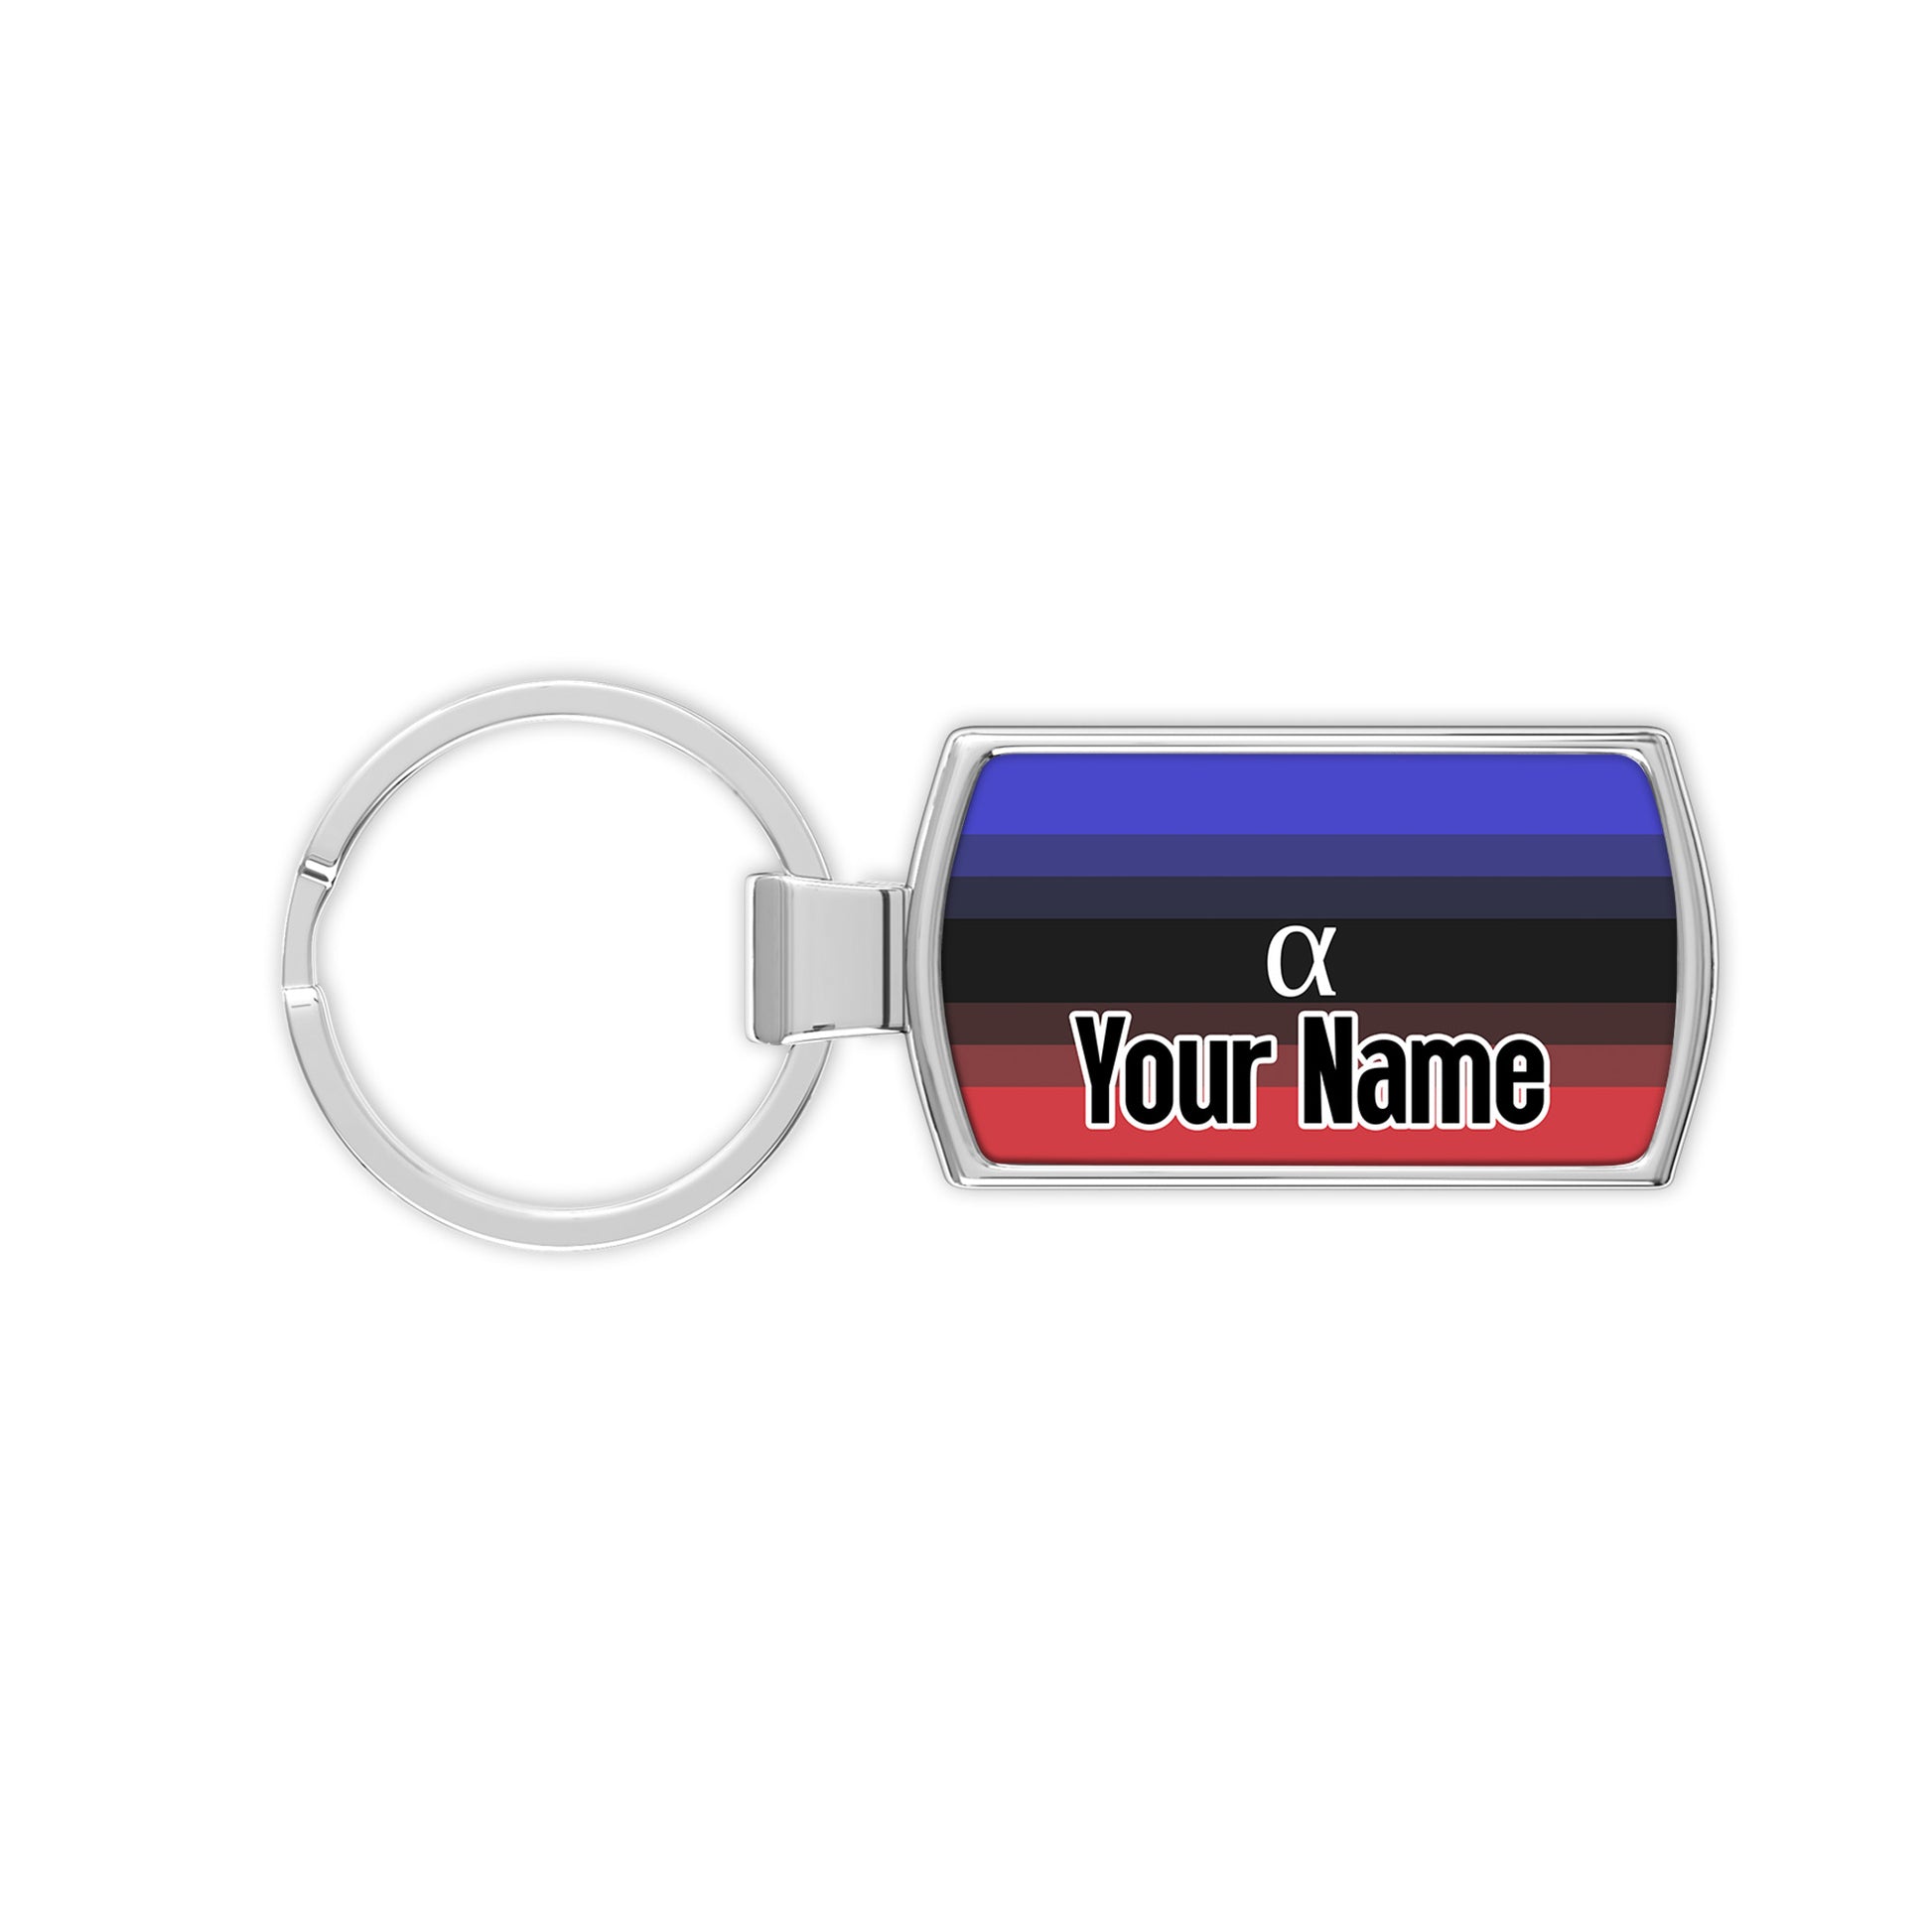 Ambiamorous pride flag metal keyring that comes personalised with your name printed on it